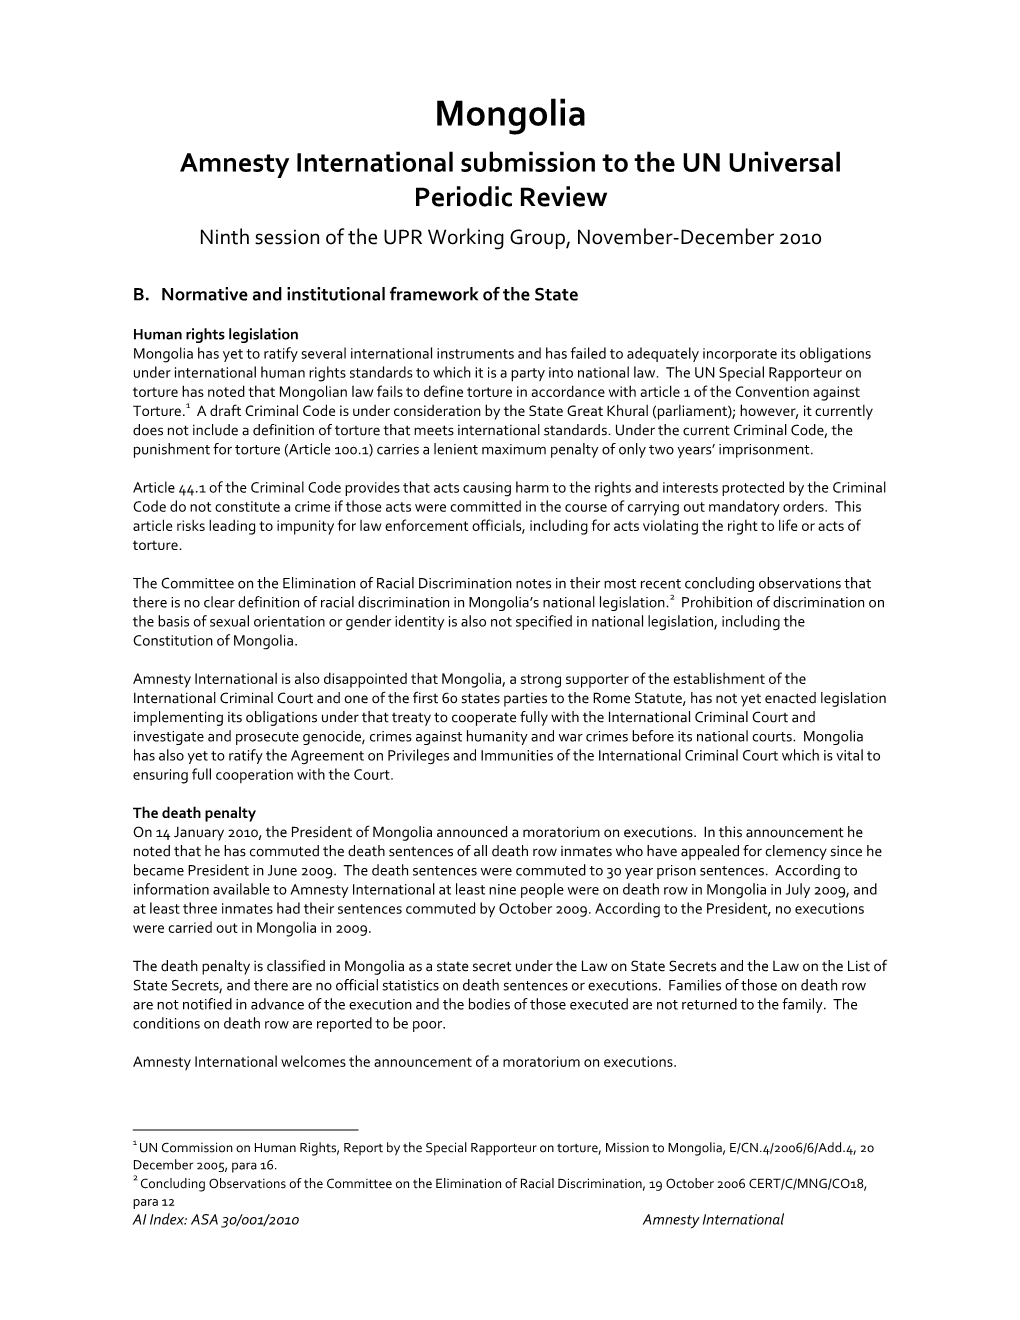 Mongolia Amnesty International Submission to the UN Universal Periodic Review Ninth Session of the UPR Working Group, November‐December 2010